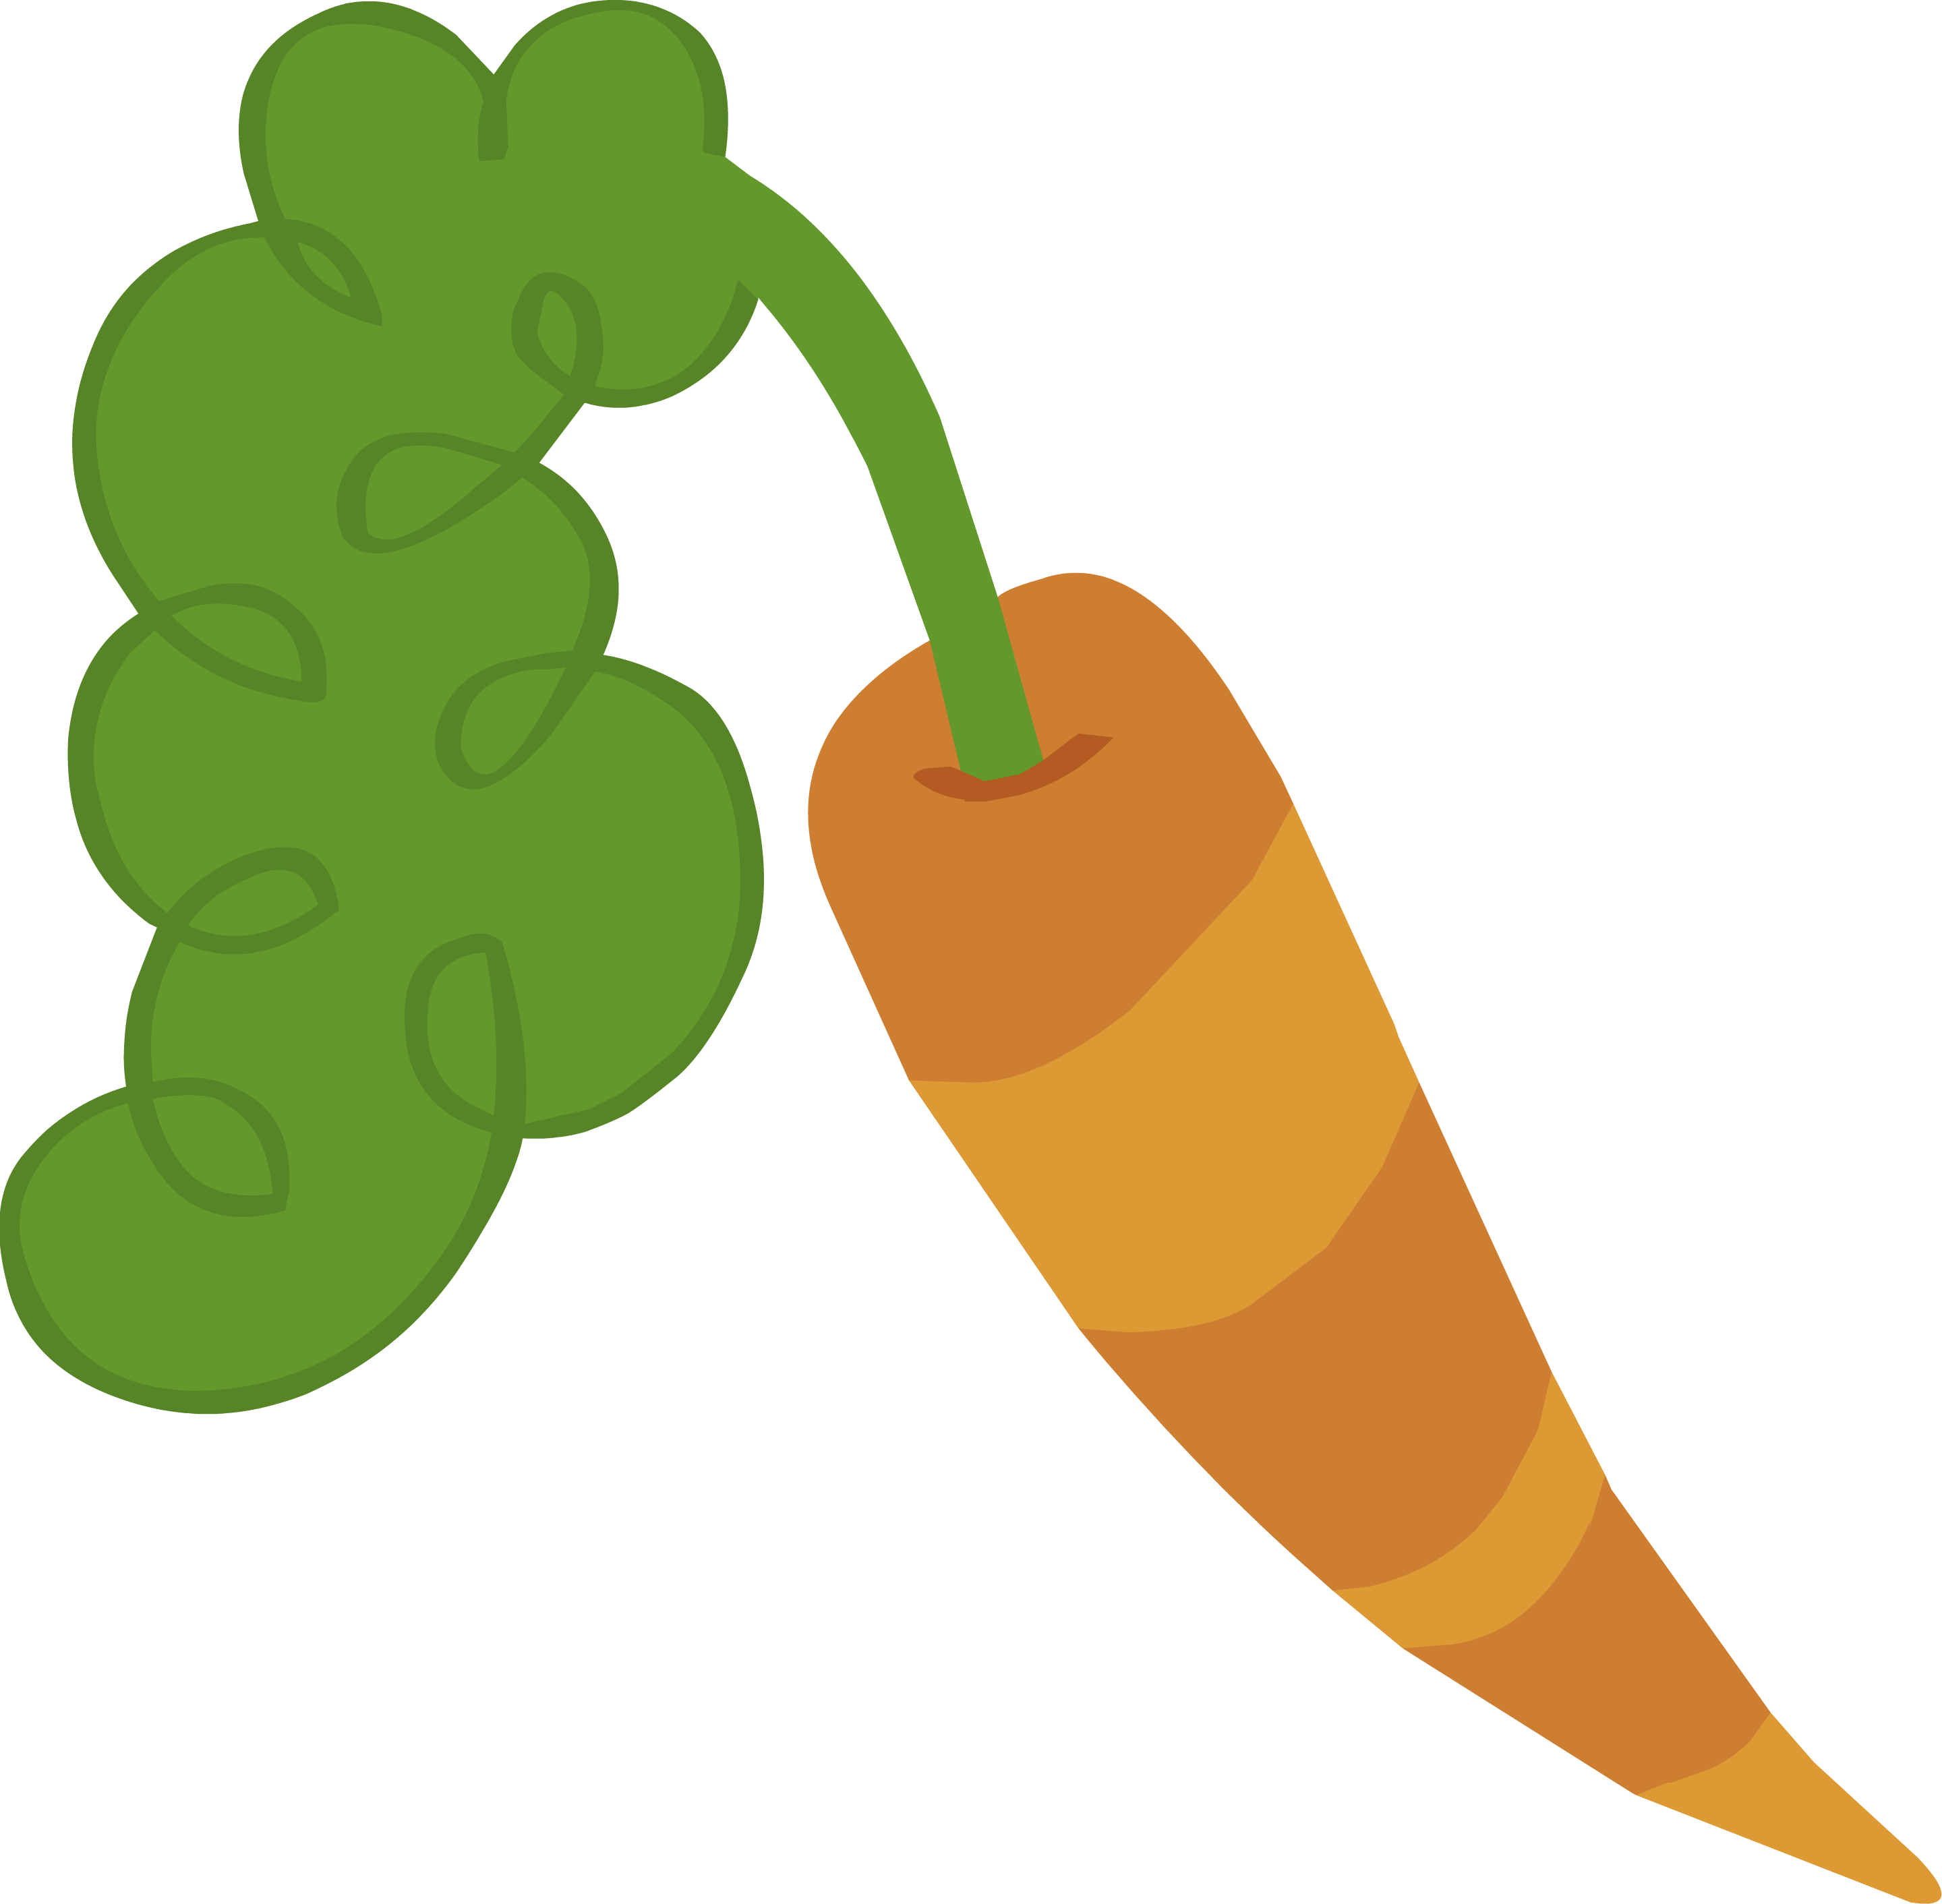 Carrot Png - ClipArt Best